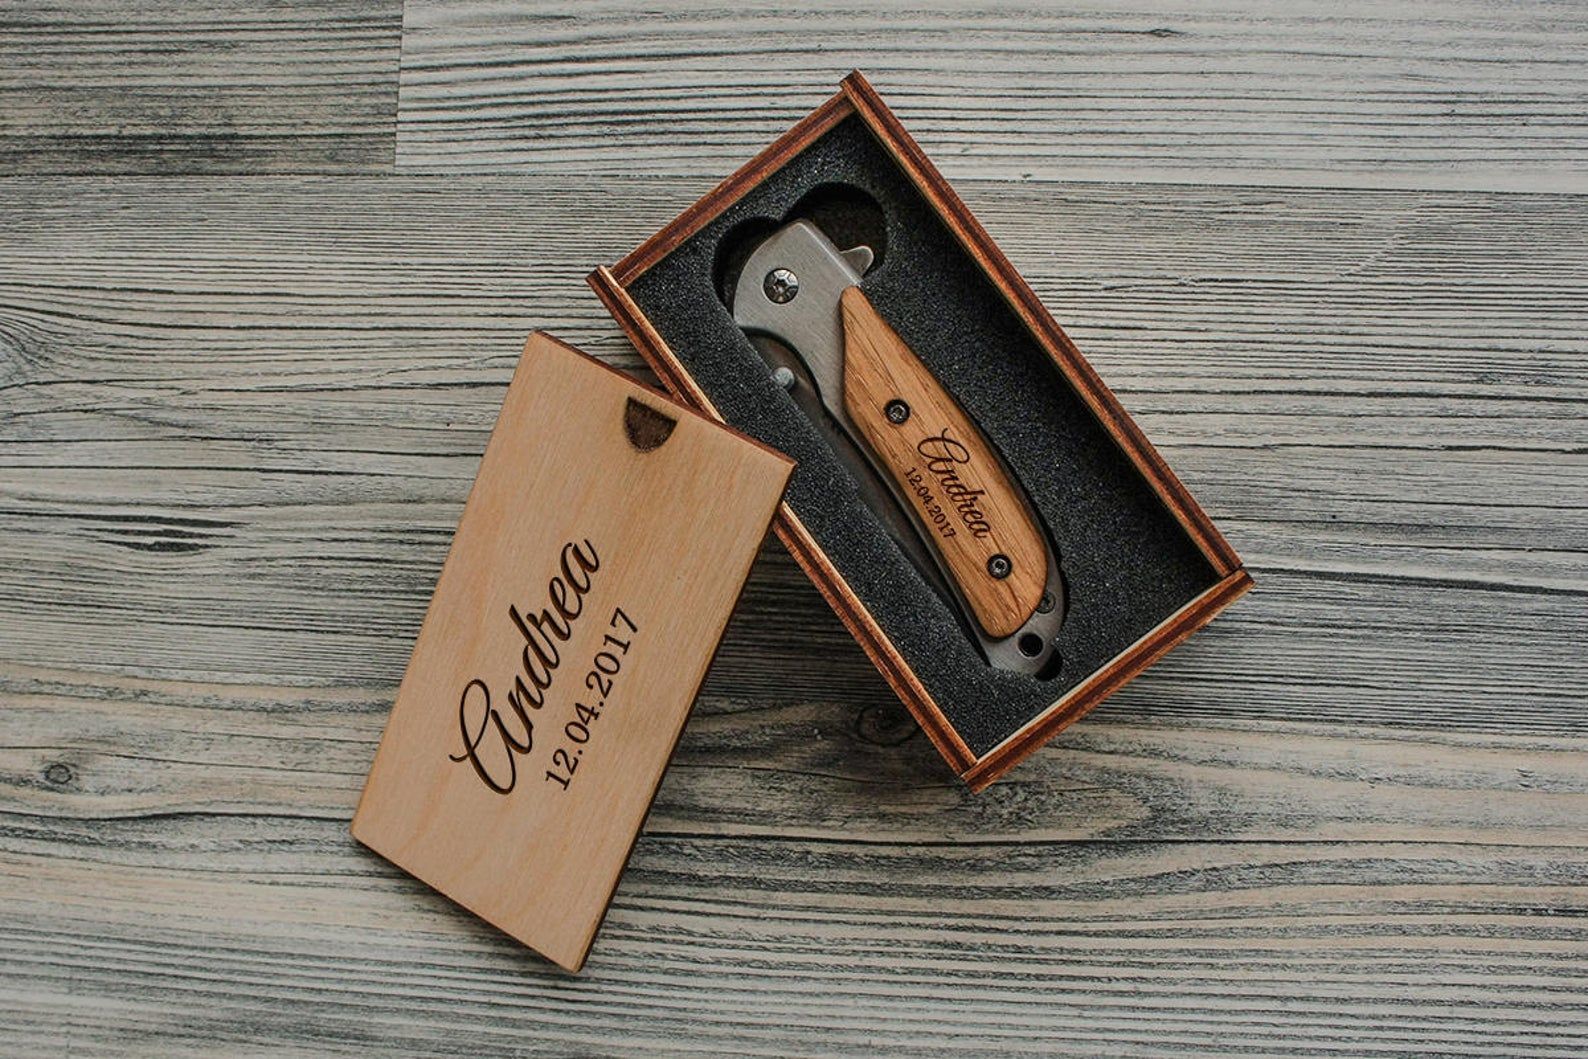 cool fathers day gifts